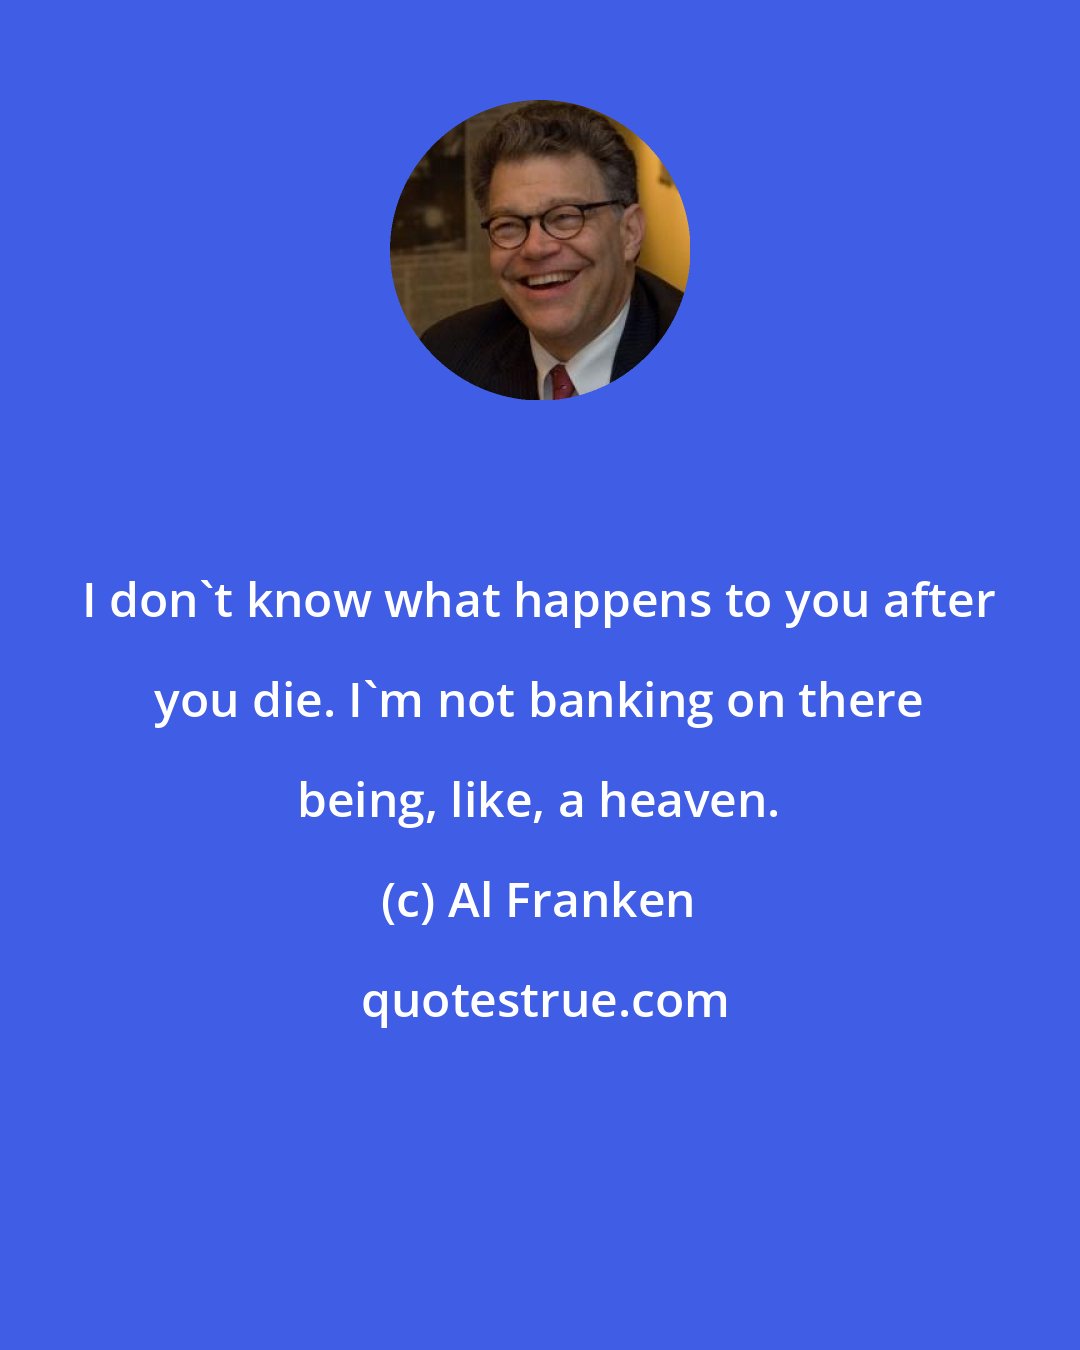 Al Franken: I don't know what happens to you after you die. I'm not banking on there being, like, a heaven.